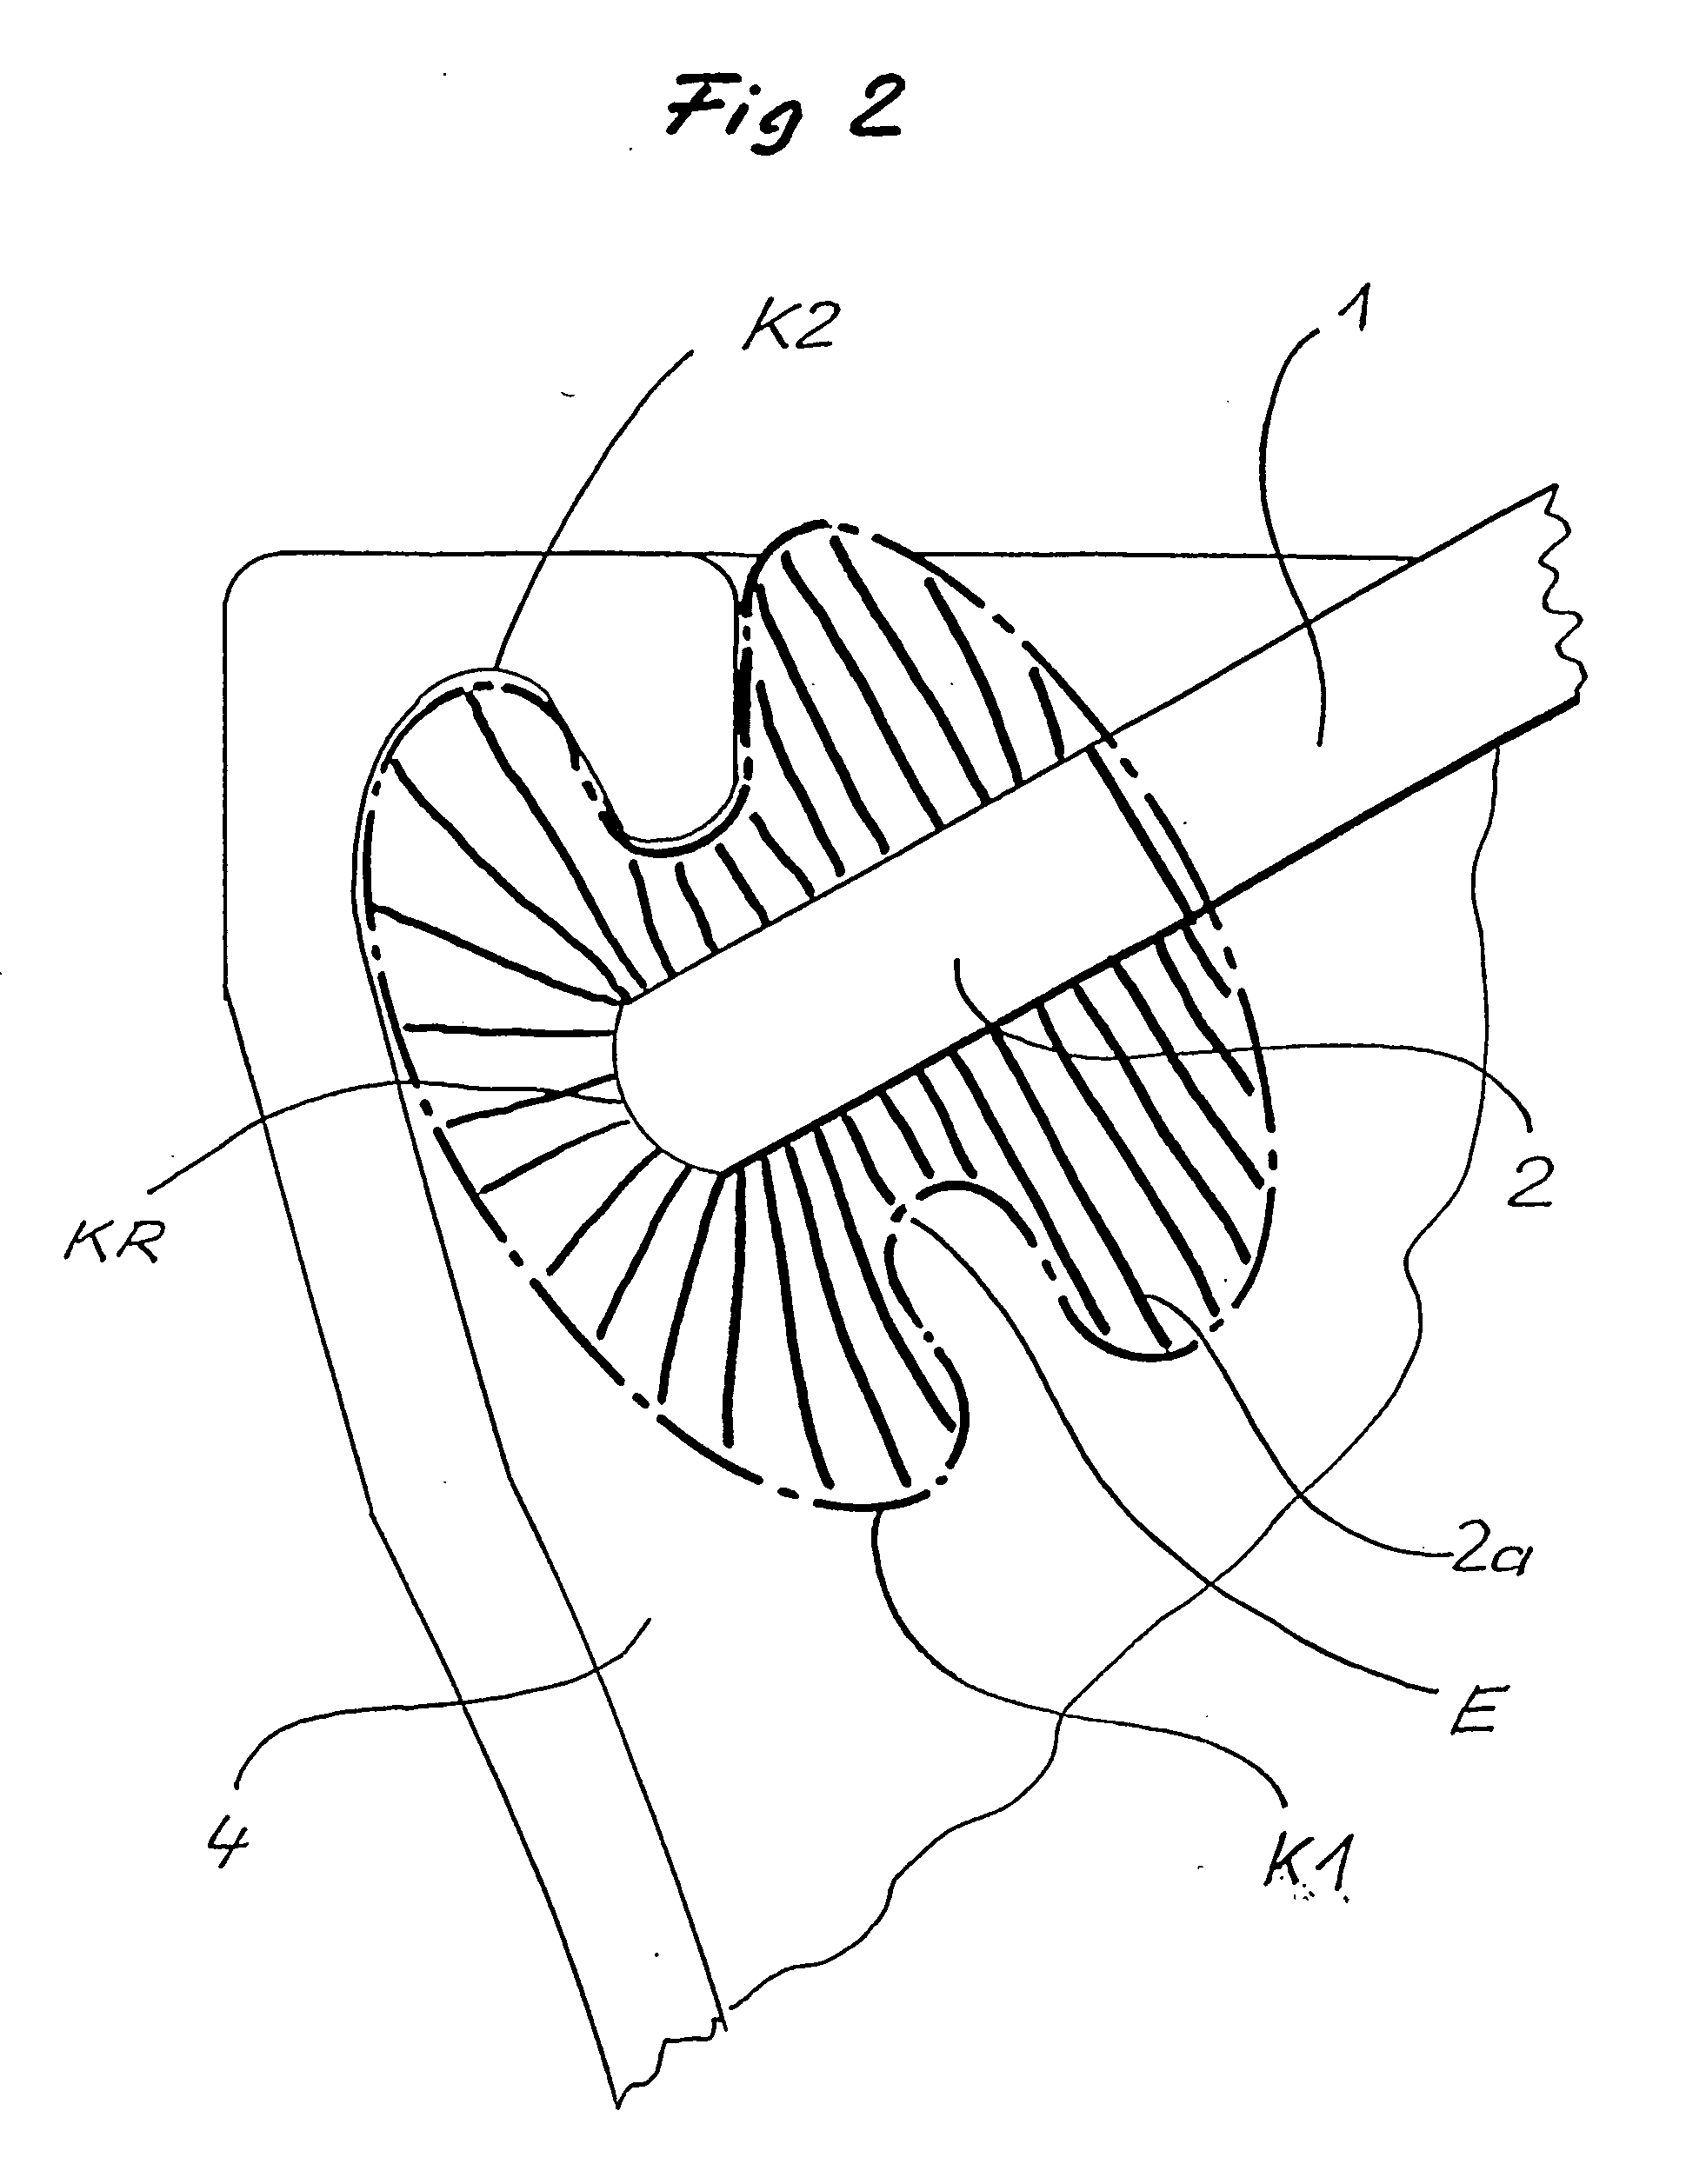 Cleaning device for cleaning pipes and receptacles